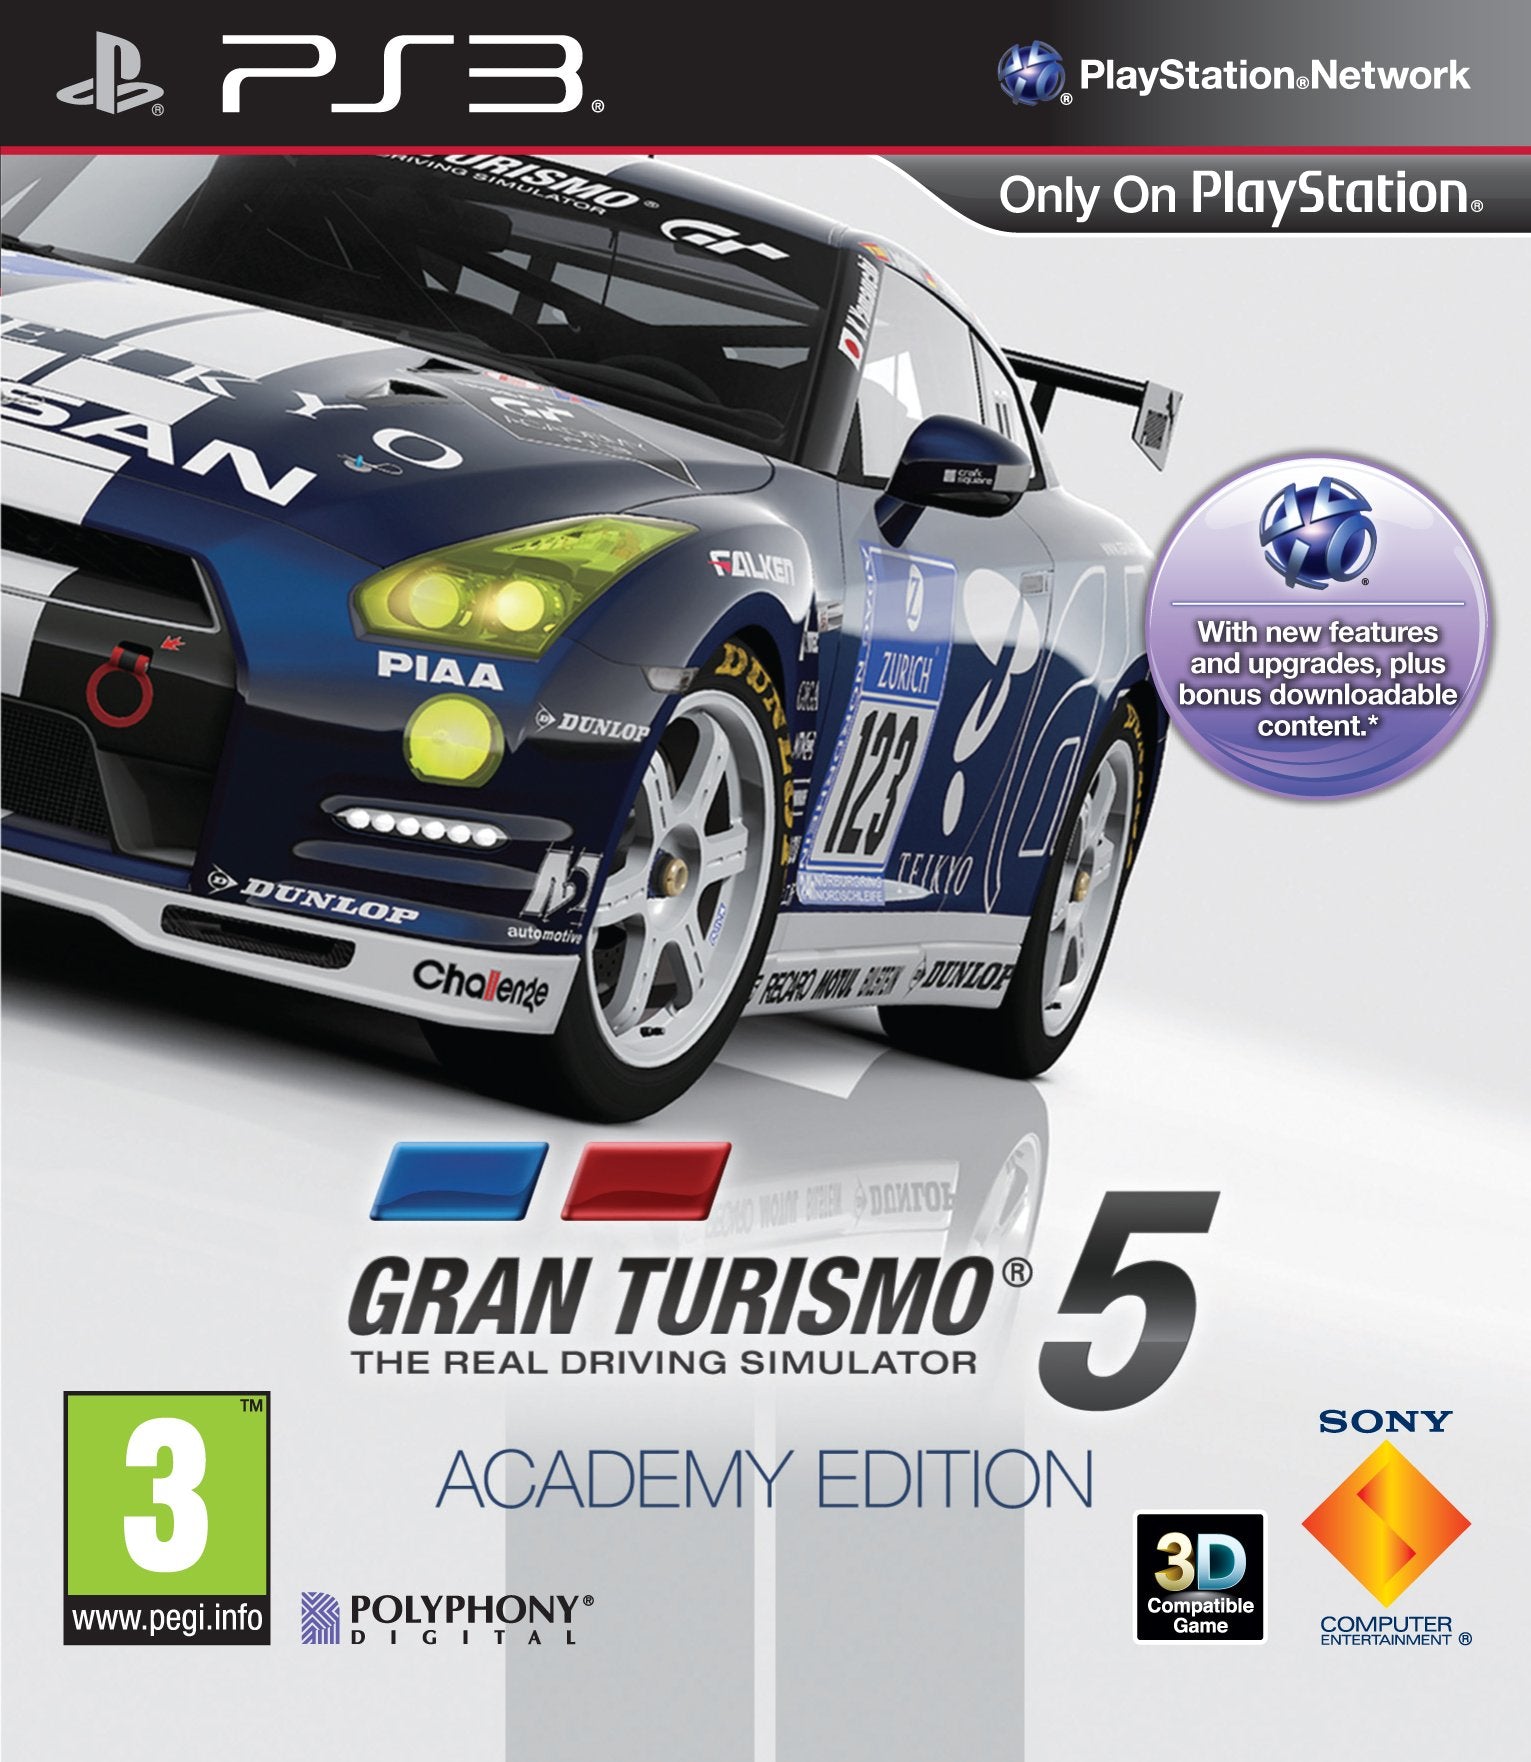 Game | Sony Playstation PS3 | Gran Turismo 5 [Academy Edition]